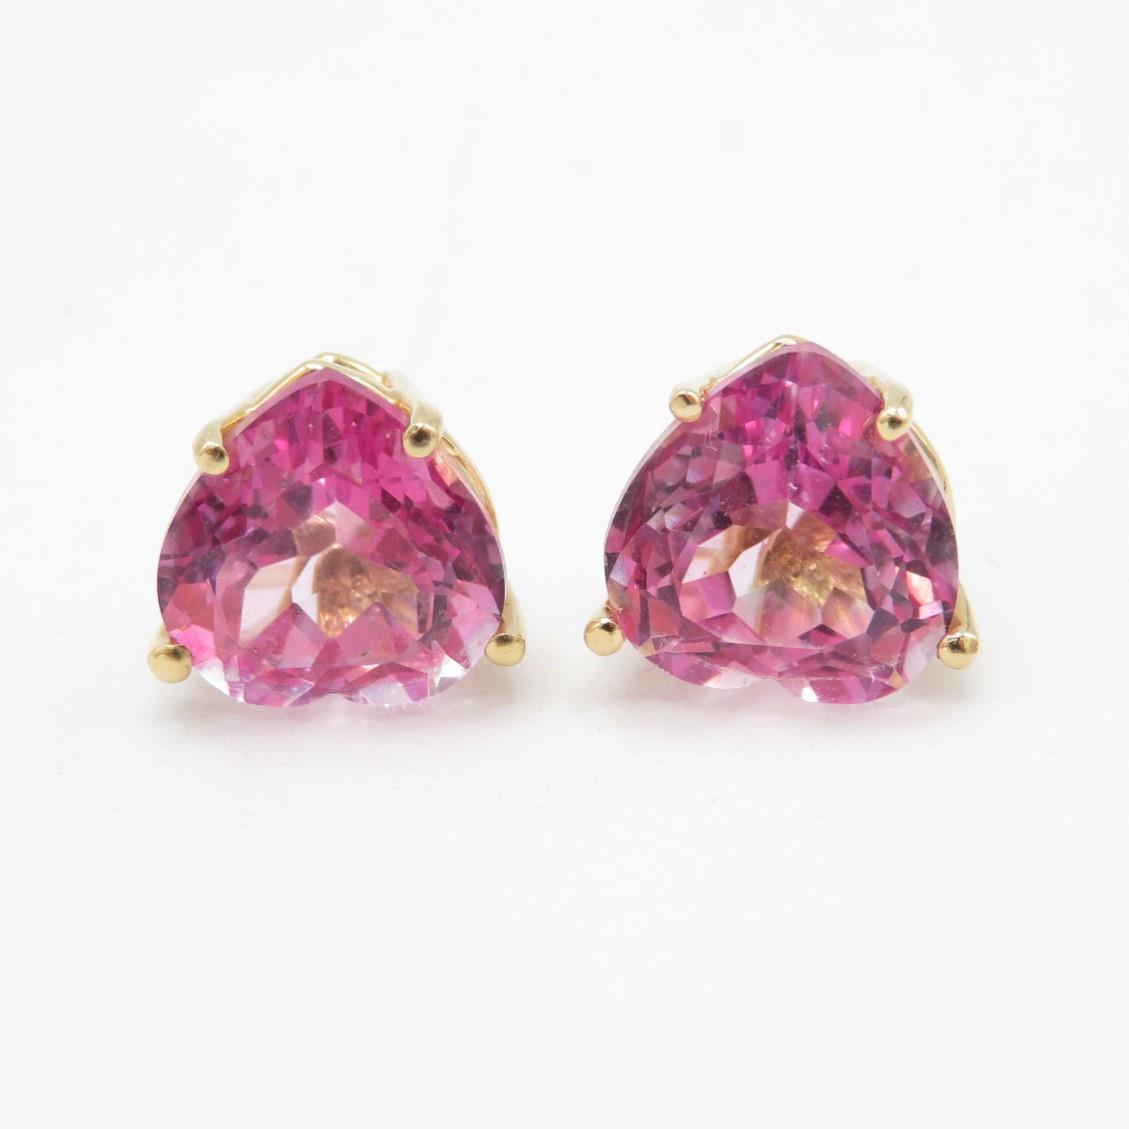 HM 9ct gold stud earrings with large pink paste stones (4.1g)